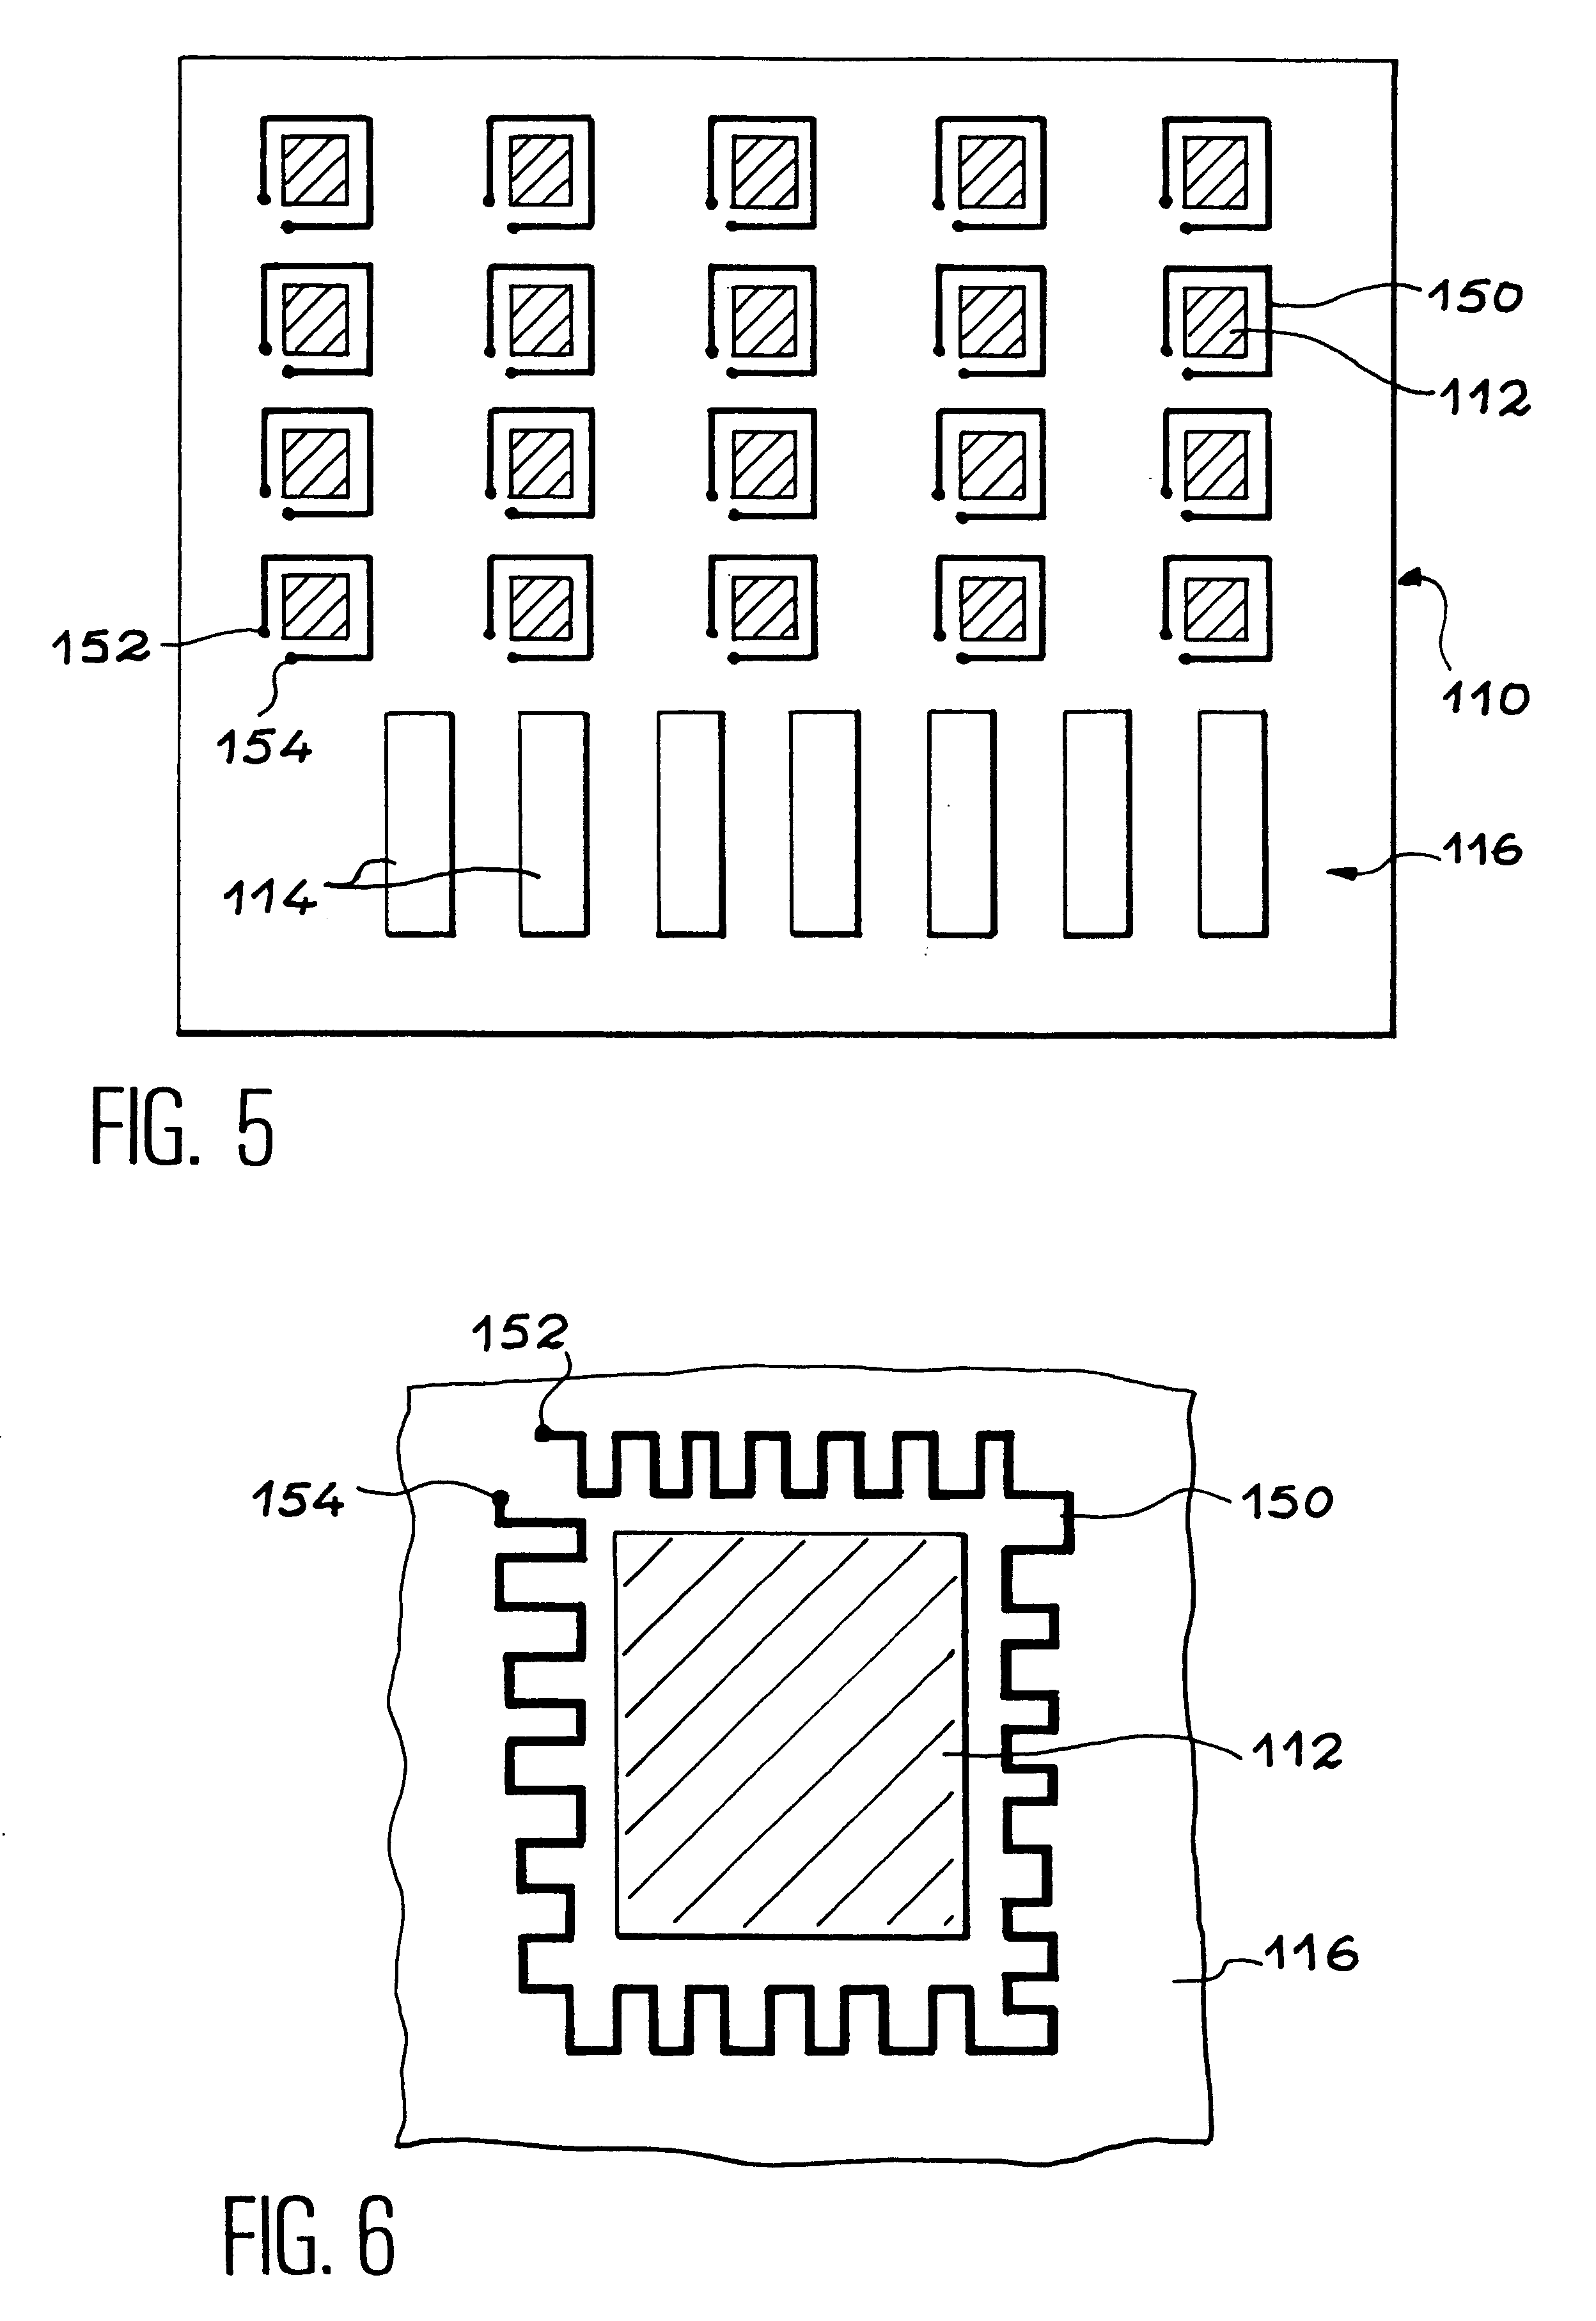 Chip-based analysis device comprising electrodes with localized heating